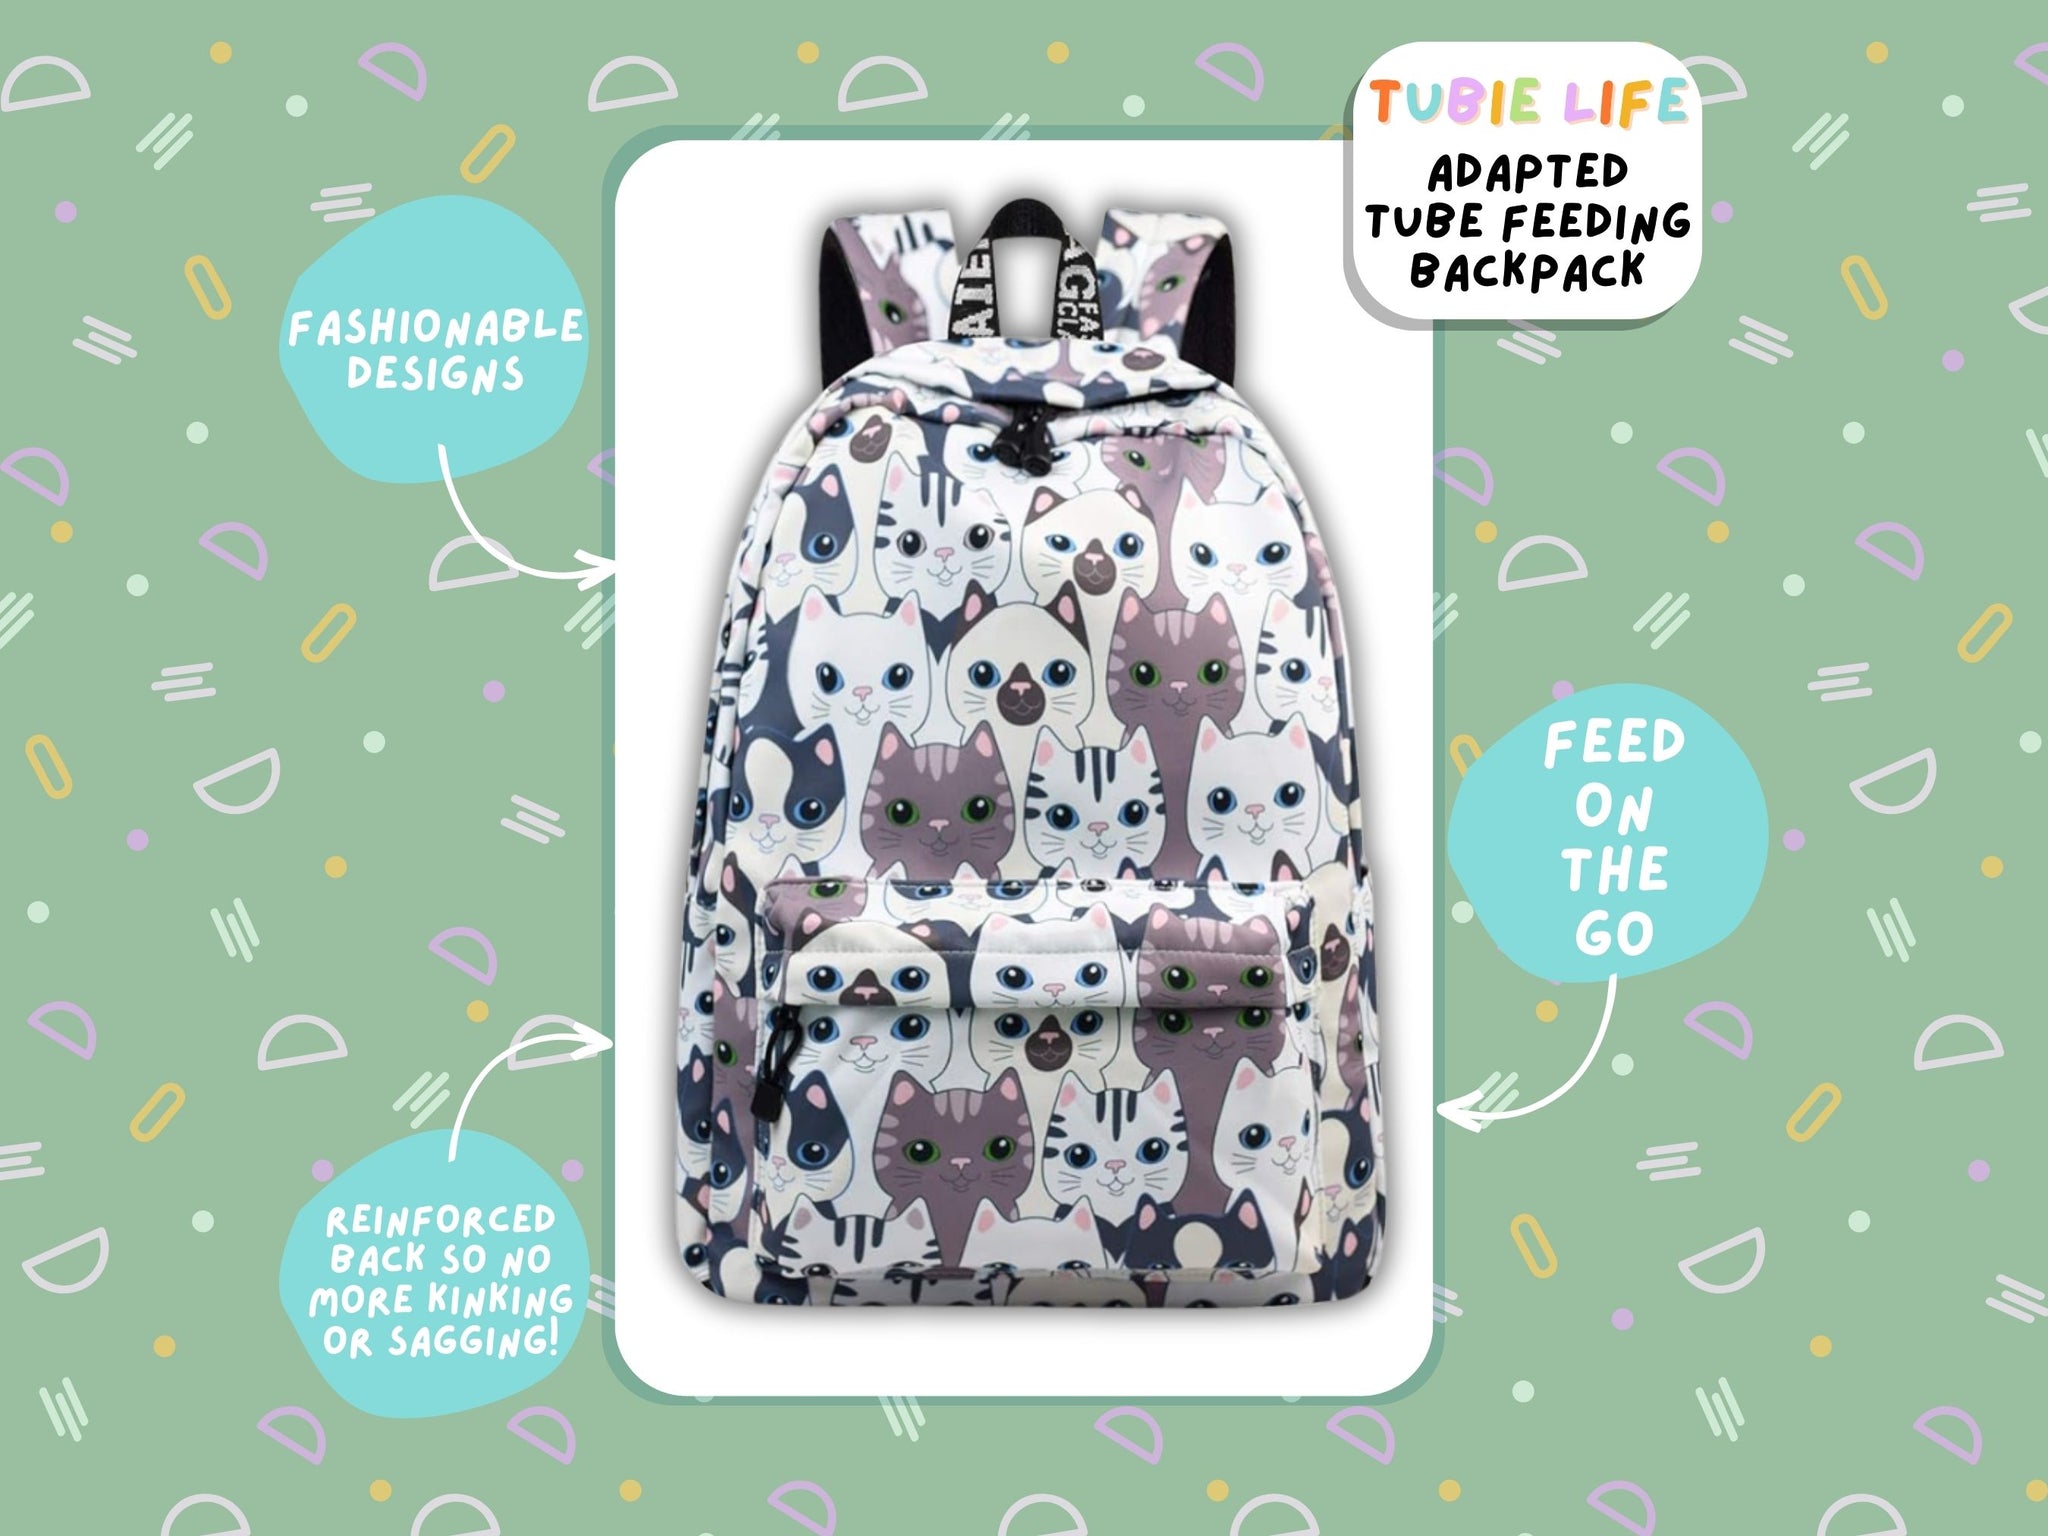 Cats Tubie Life Adapted Backpack Pattern